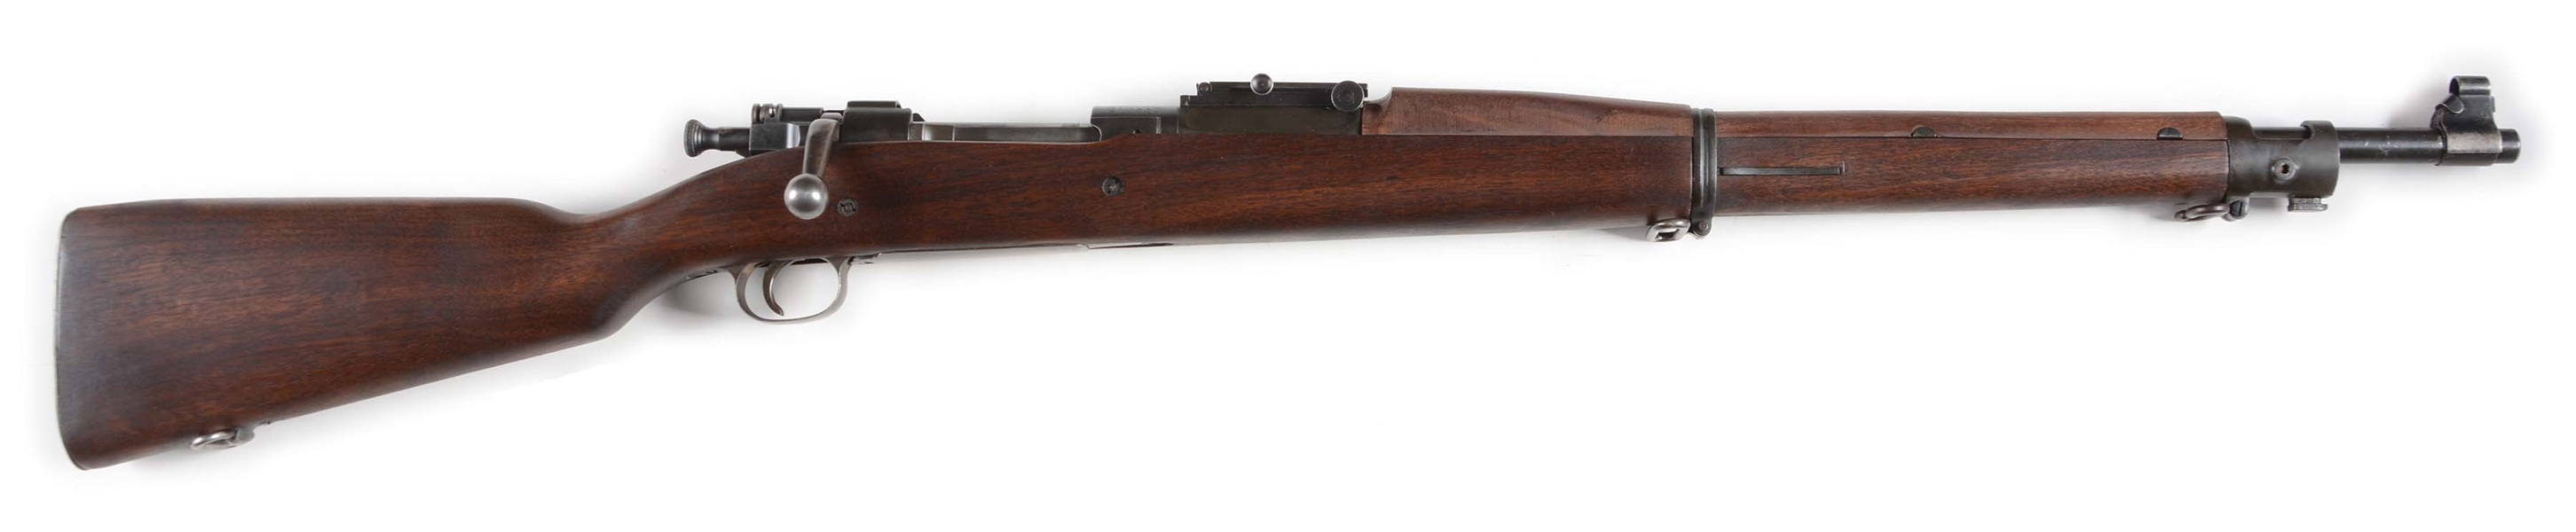 (C) US SPRINGFIELD ARMORY 1903 BOLT ACTION RIFLE.